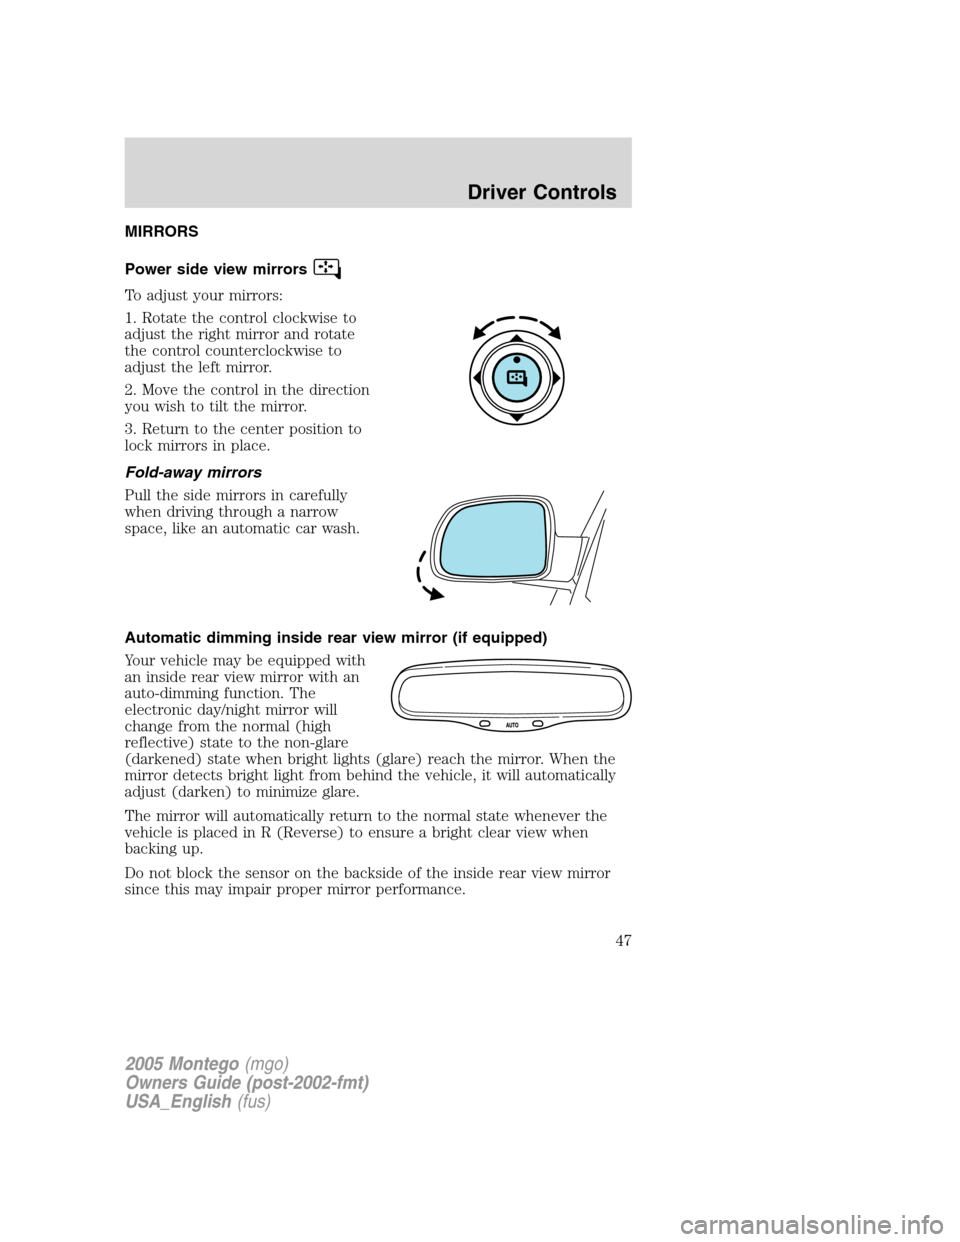 Mercury Montego 2005  s Service Manual MIRRORS
Power side view mirrors
To adjust your mirrors:
1. Rotate the control clockwise to
adjust the right mirror and rotate
the control counterclockwise to
adjust the left mirror.
2. Move the contro